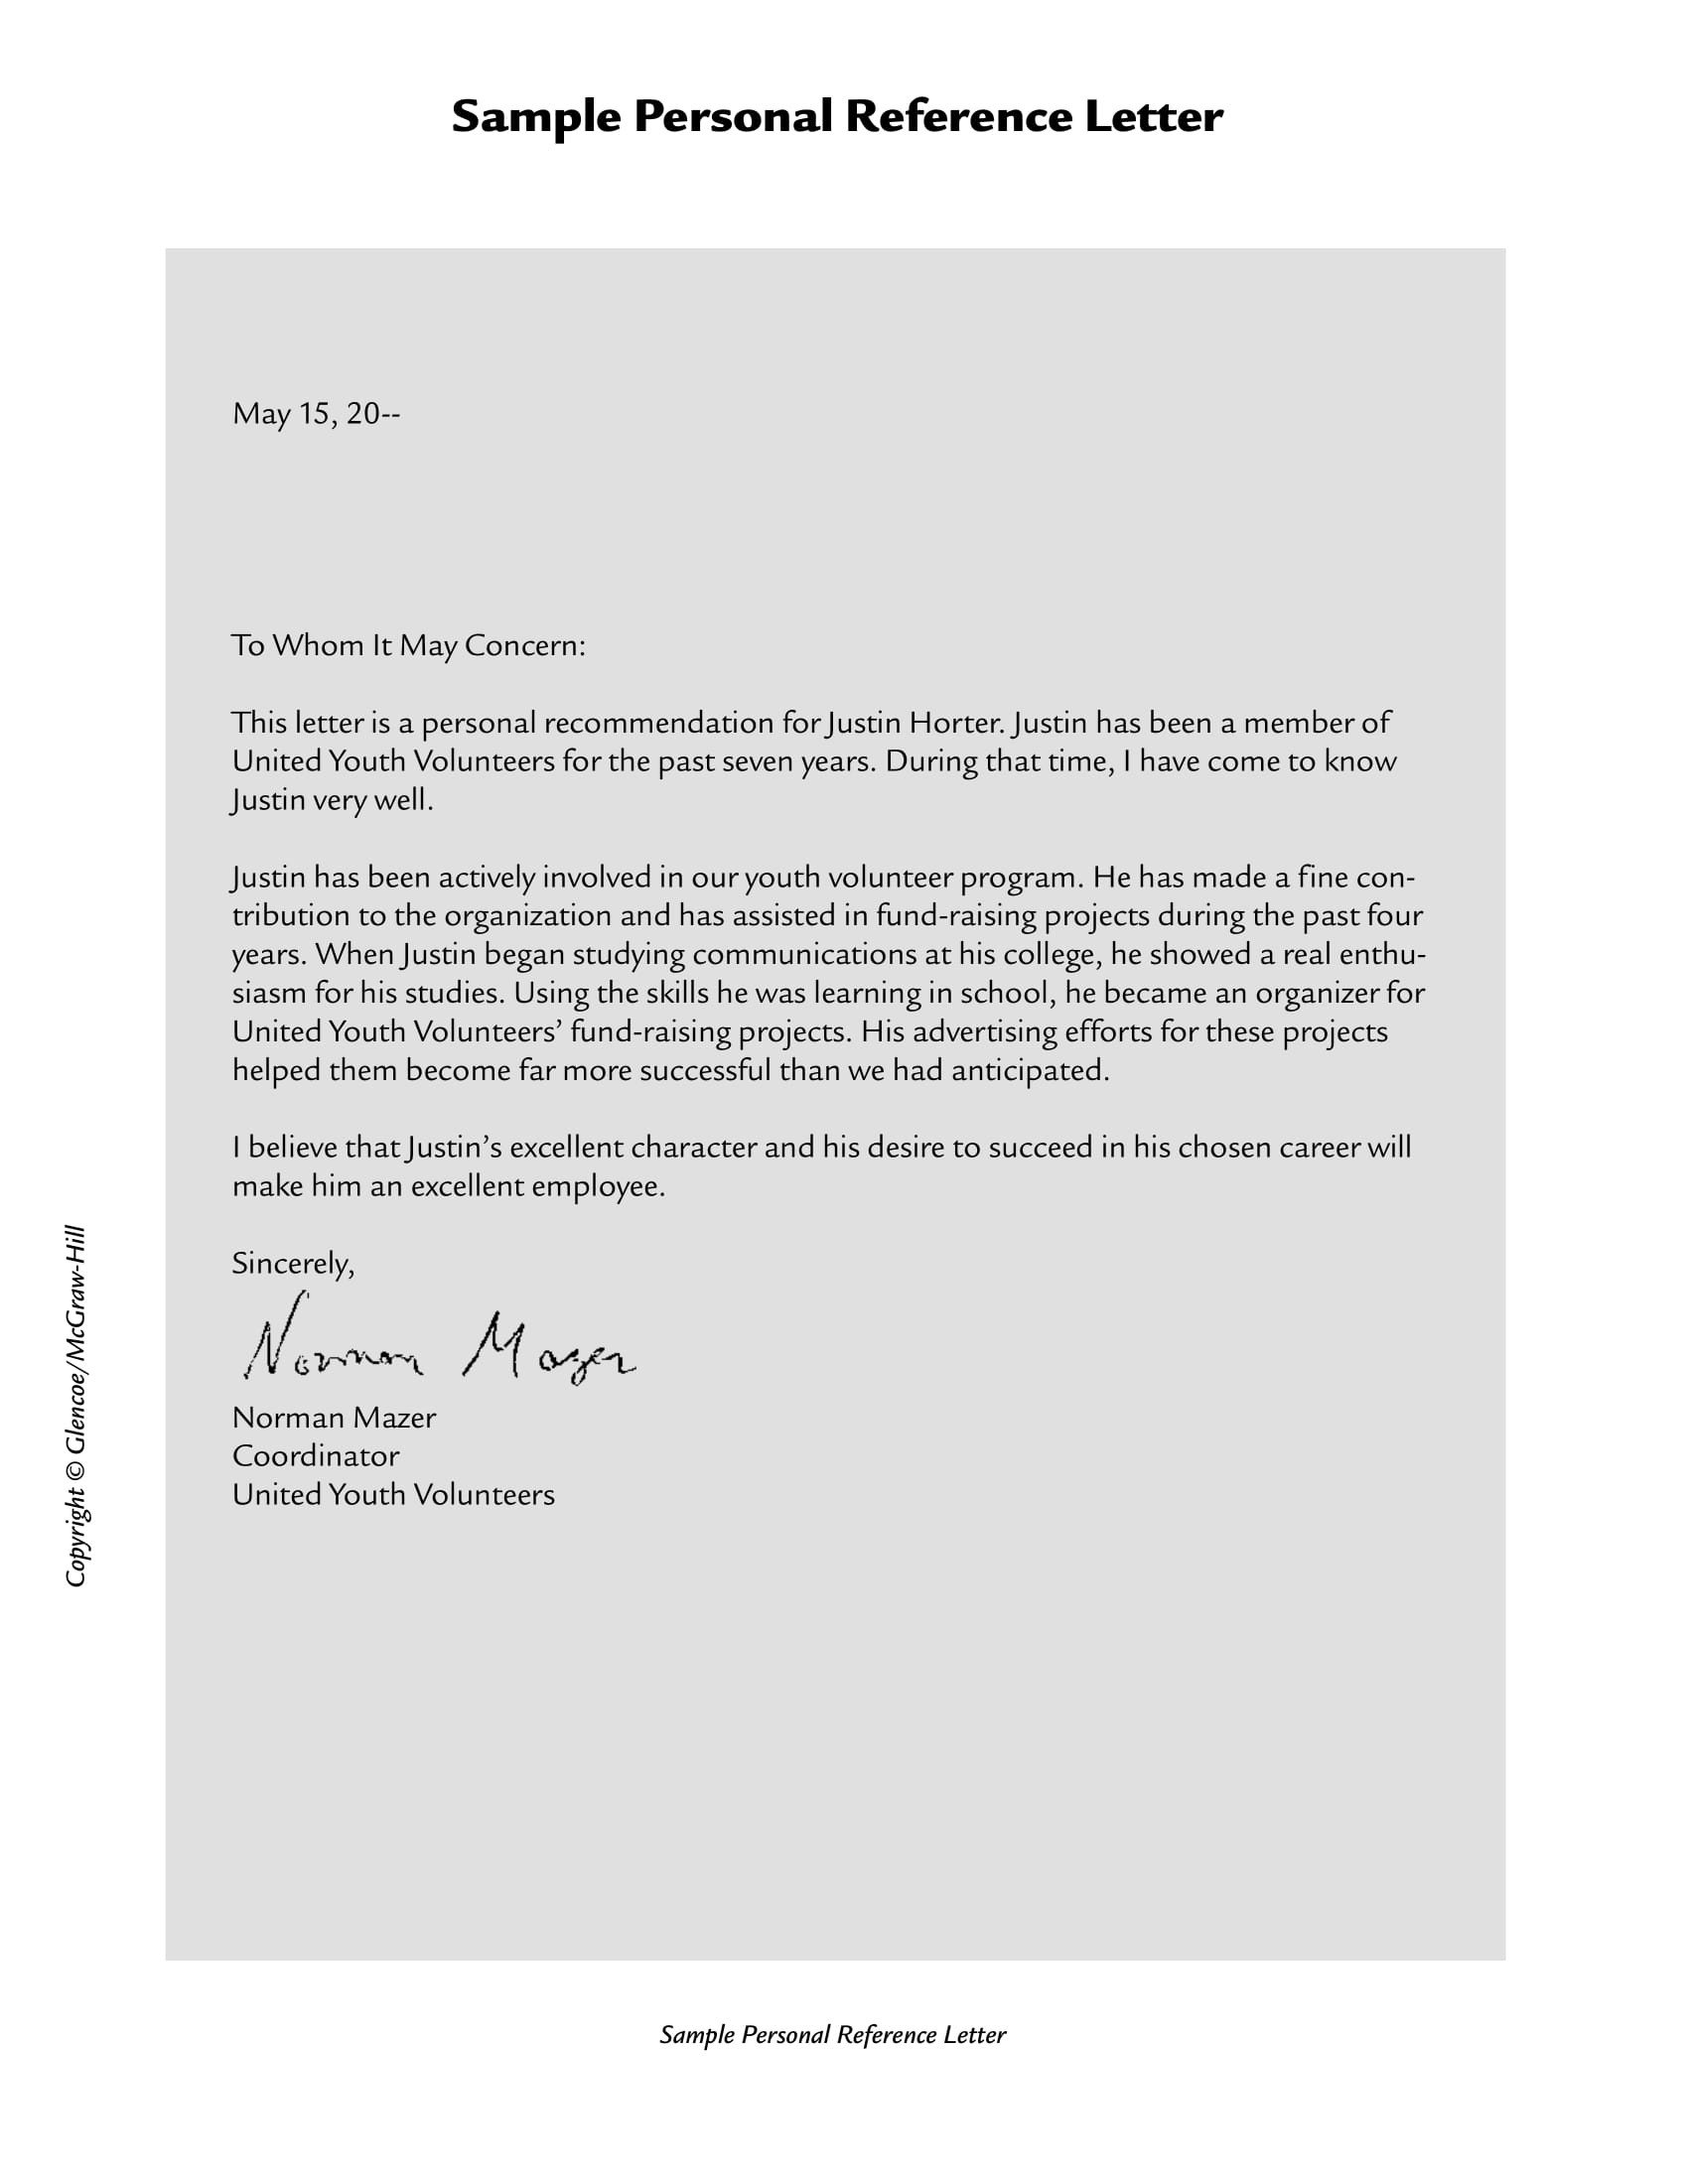 Personal Recommendation Letter Template 10 Personal Re Mendation Letter Examples Pdf Word